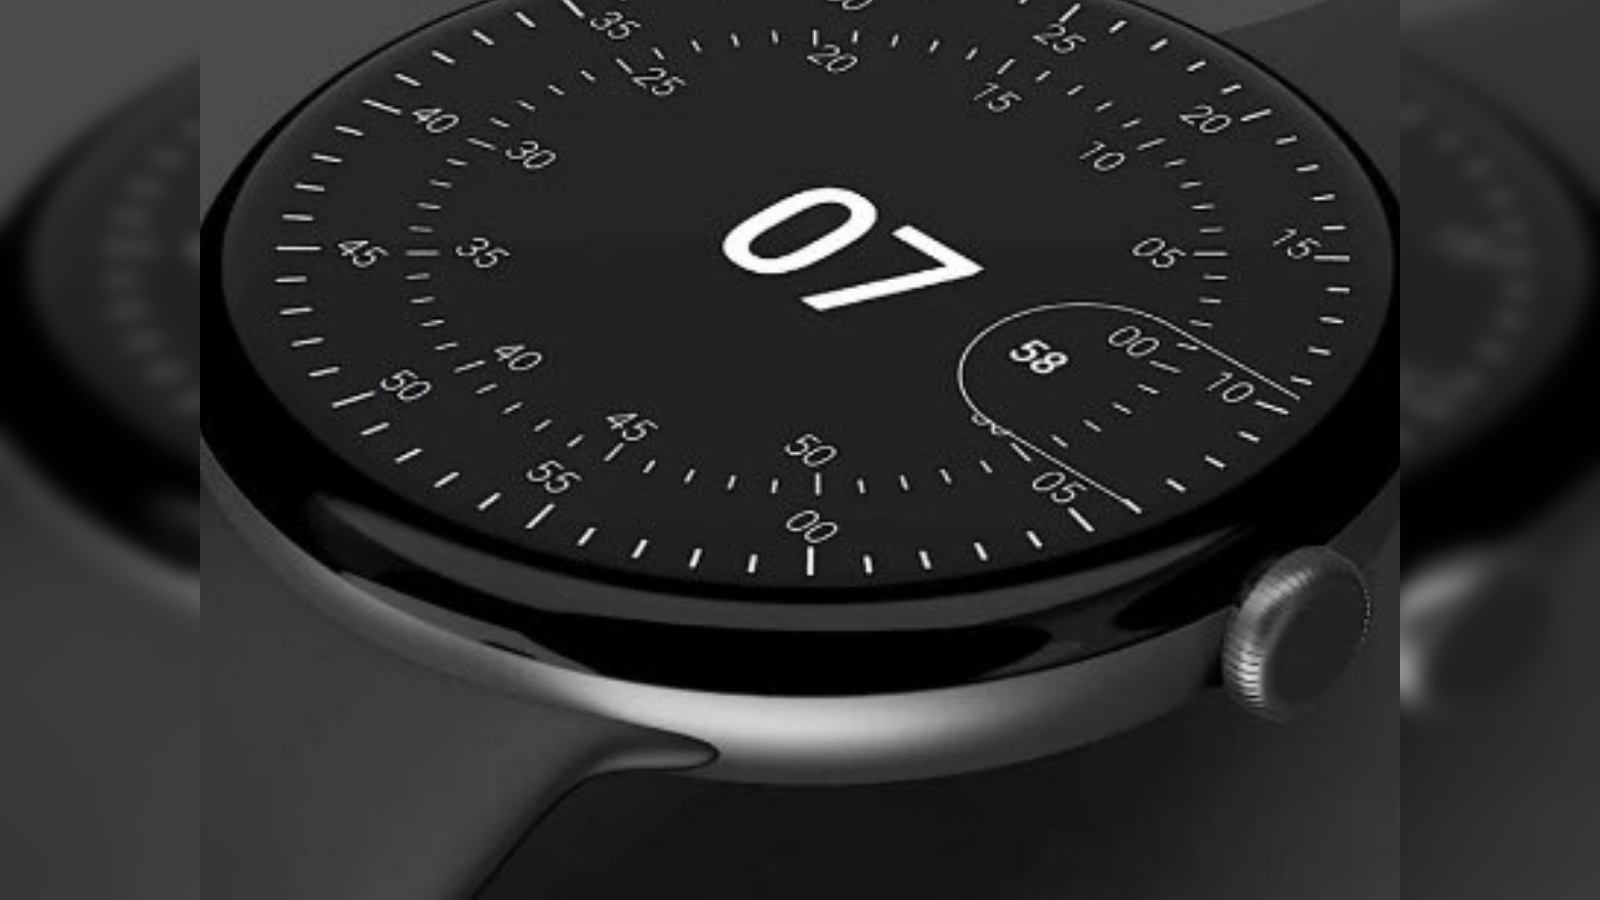 Amazfit Pop 3S is coming soon with a huge 1.96